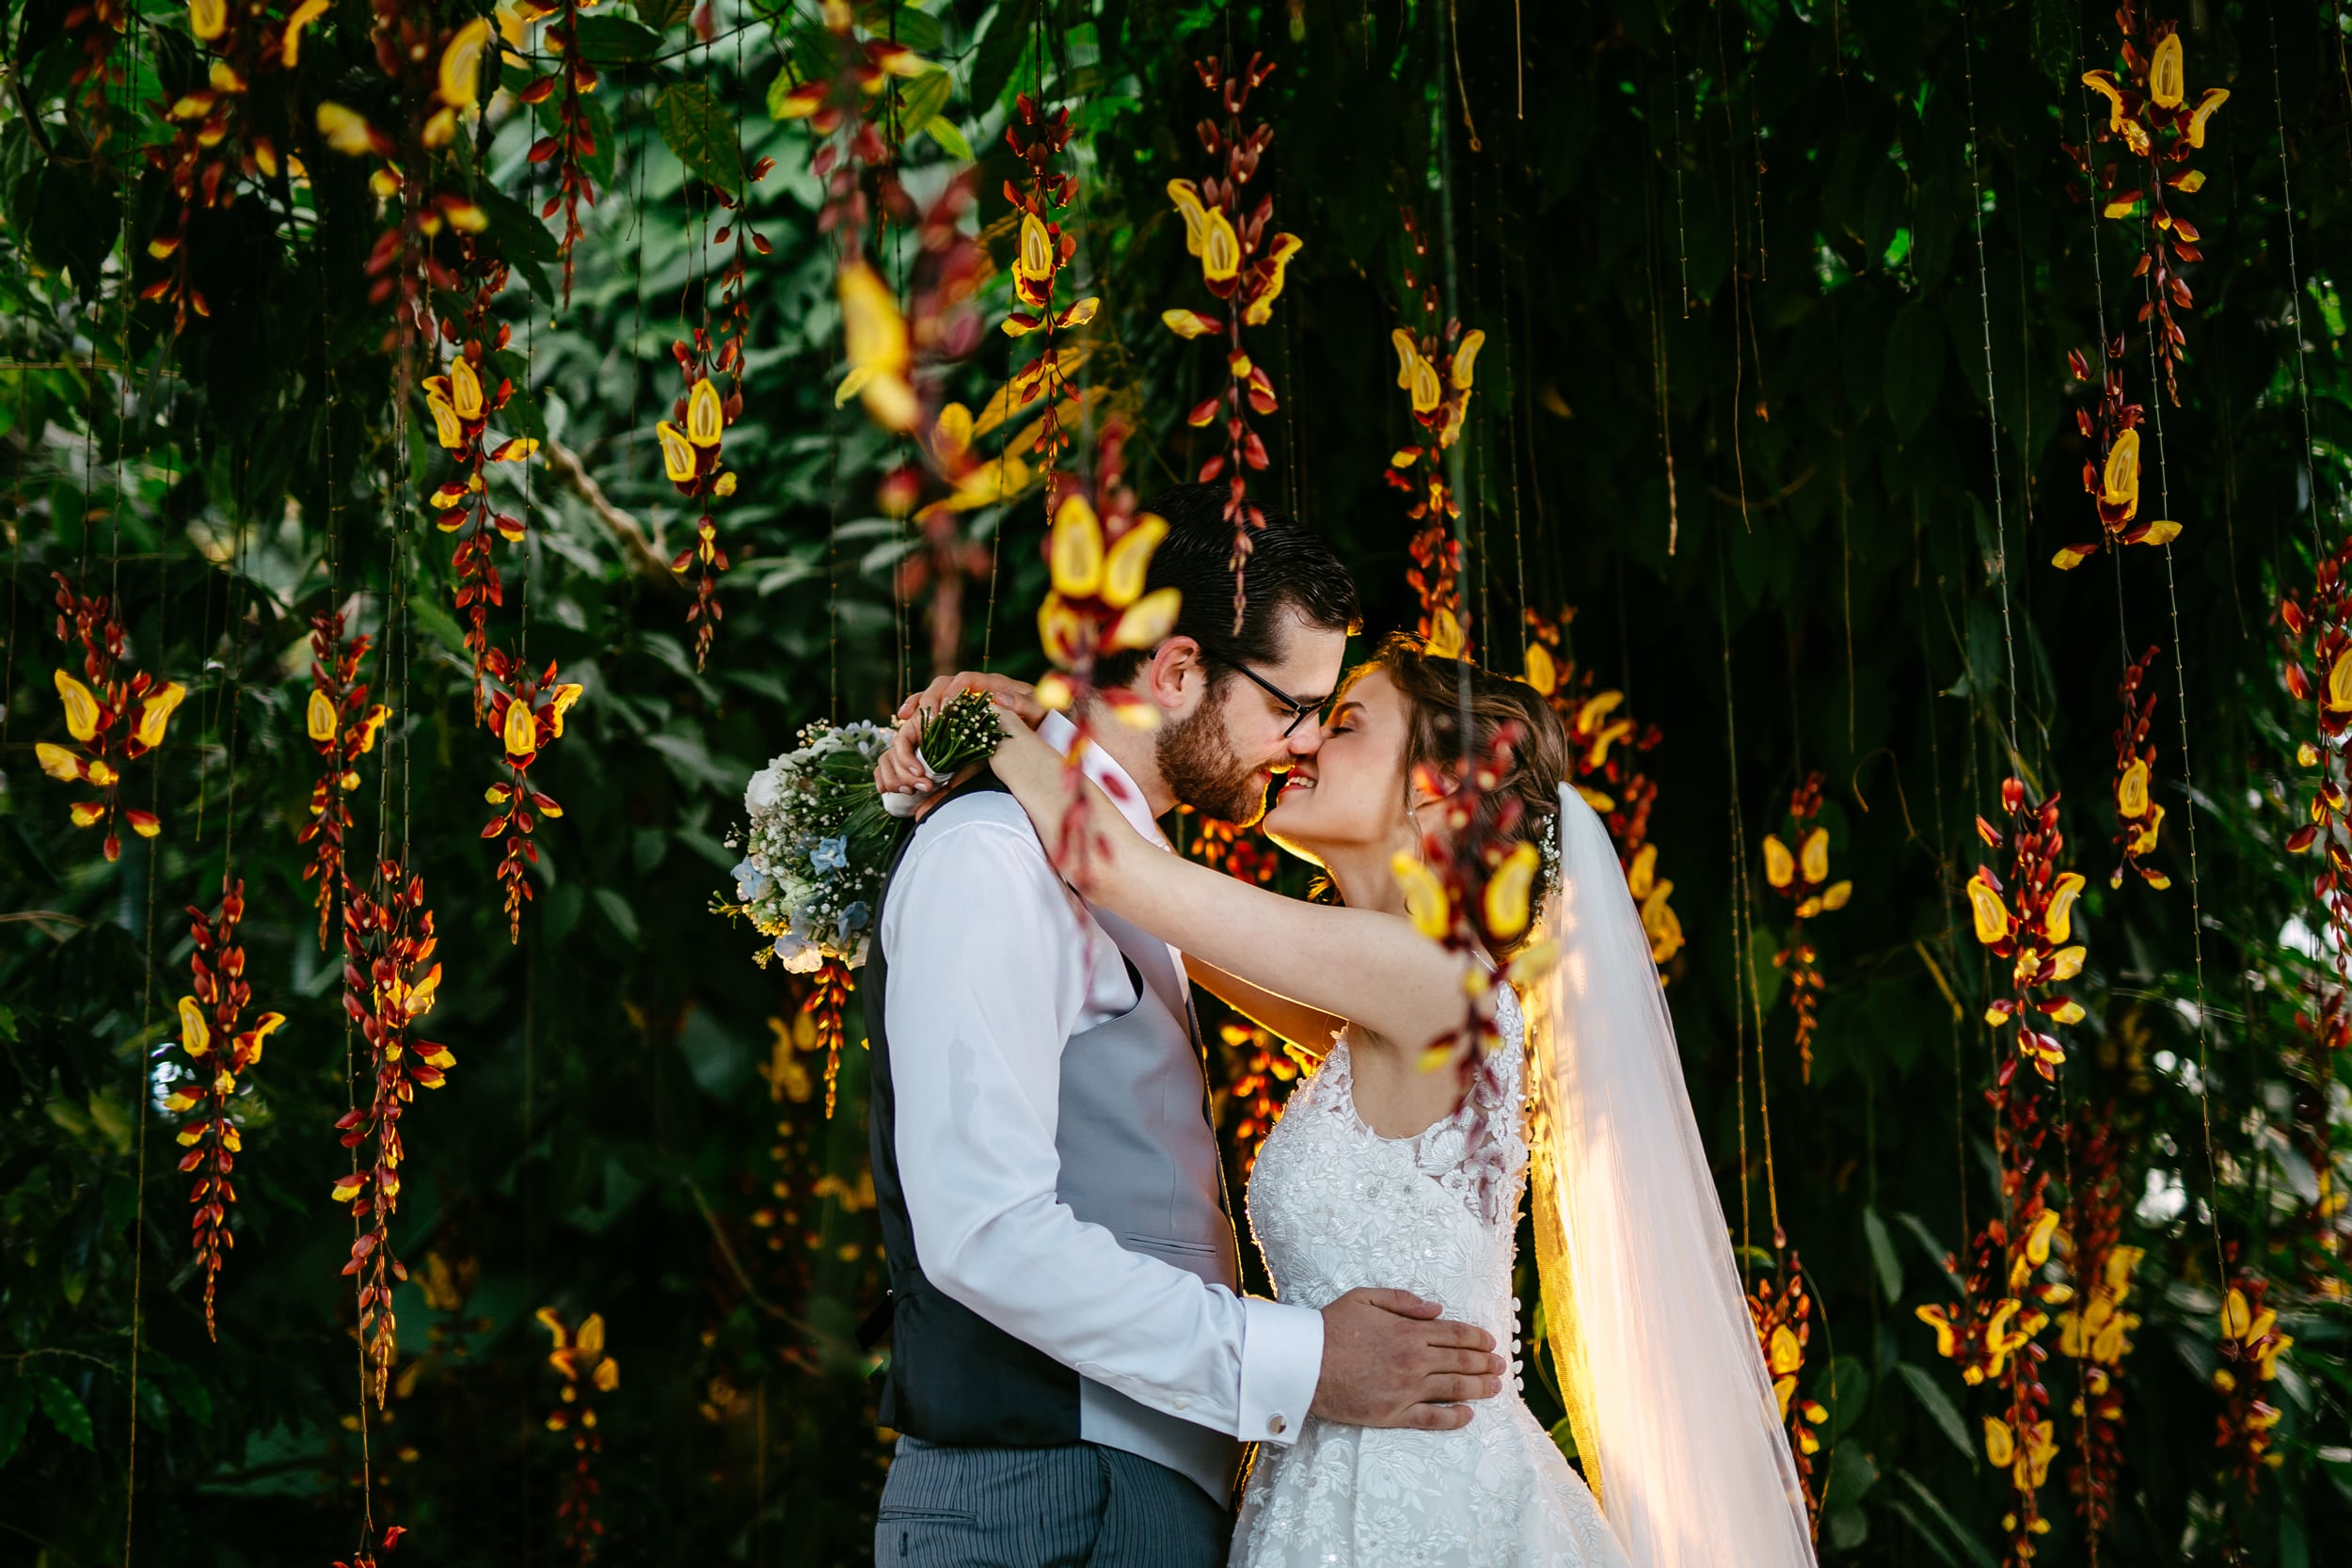 Description : A bride and groom embrace in front of a beautiful flower garden during their wedding-themed ceremony.